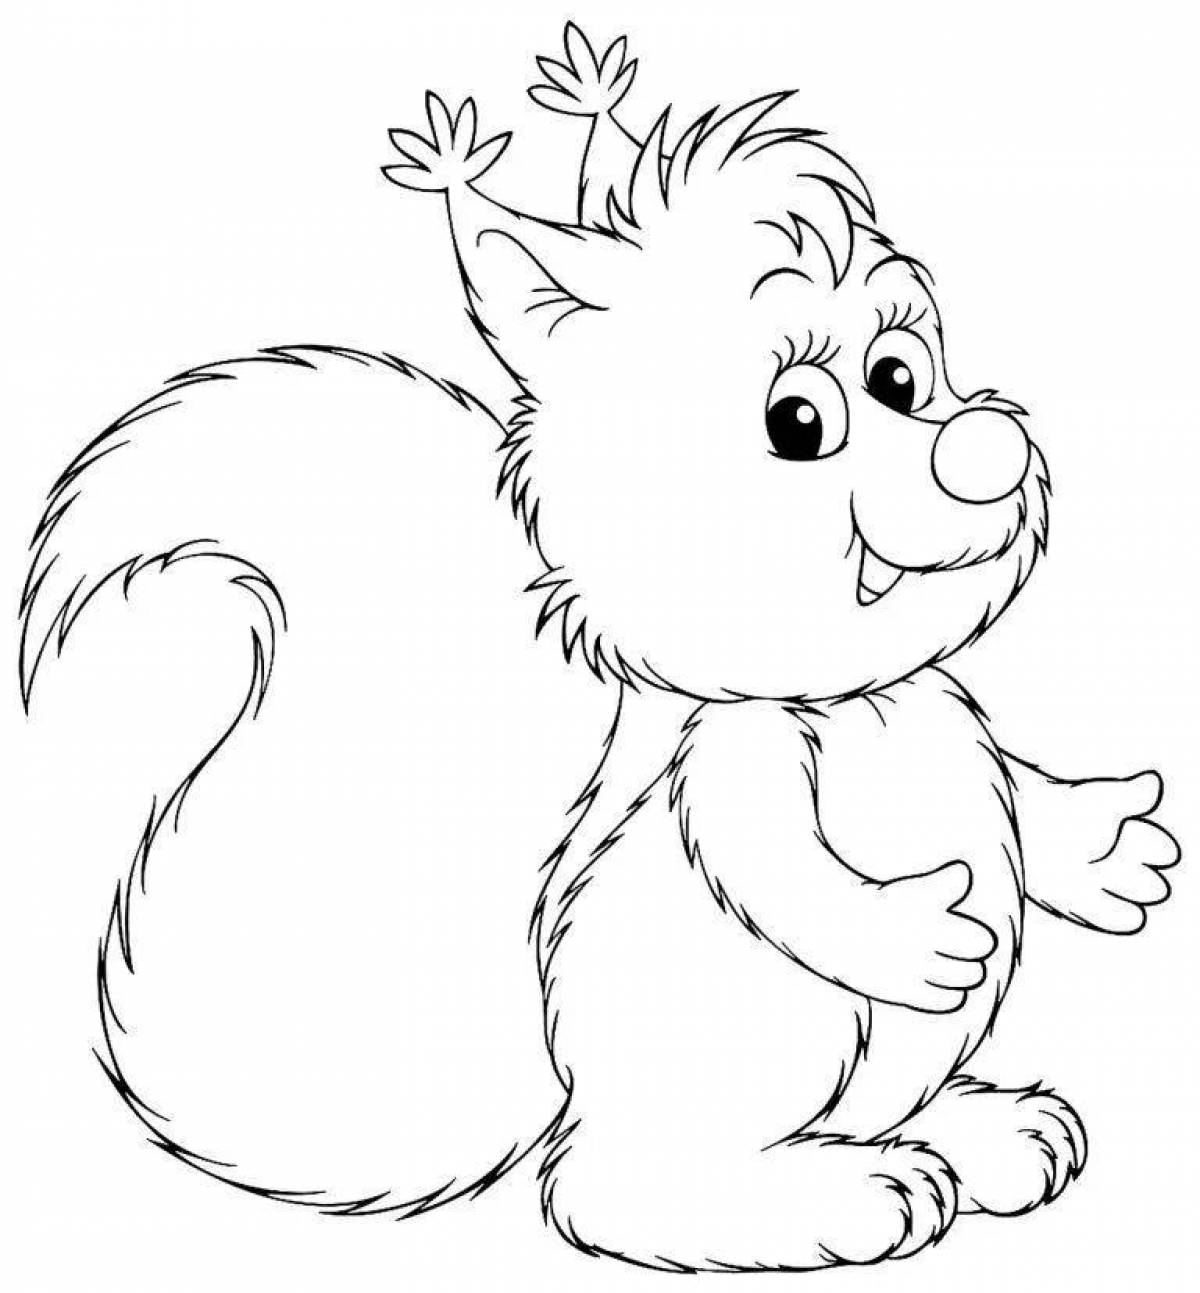 Fun squirrel coloring book for 3-4 year olds